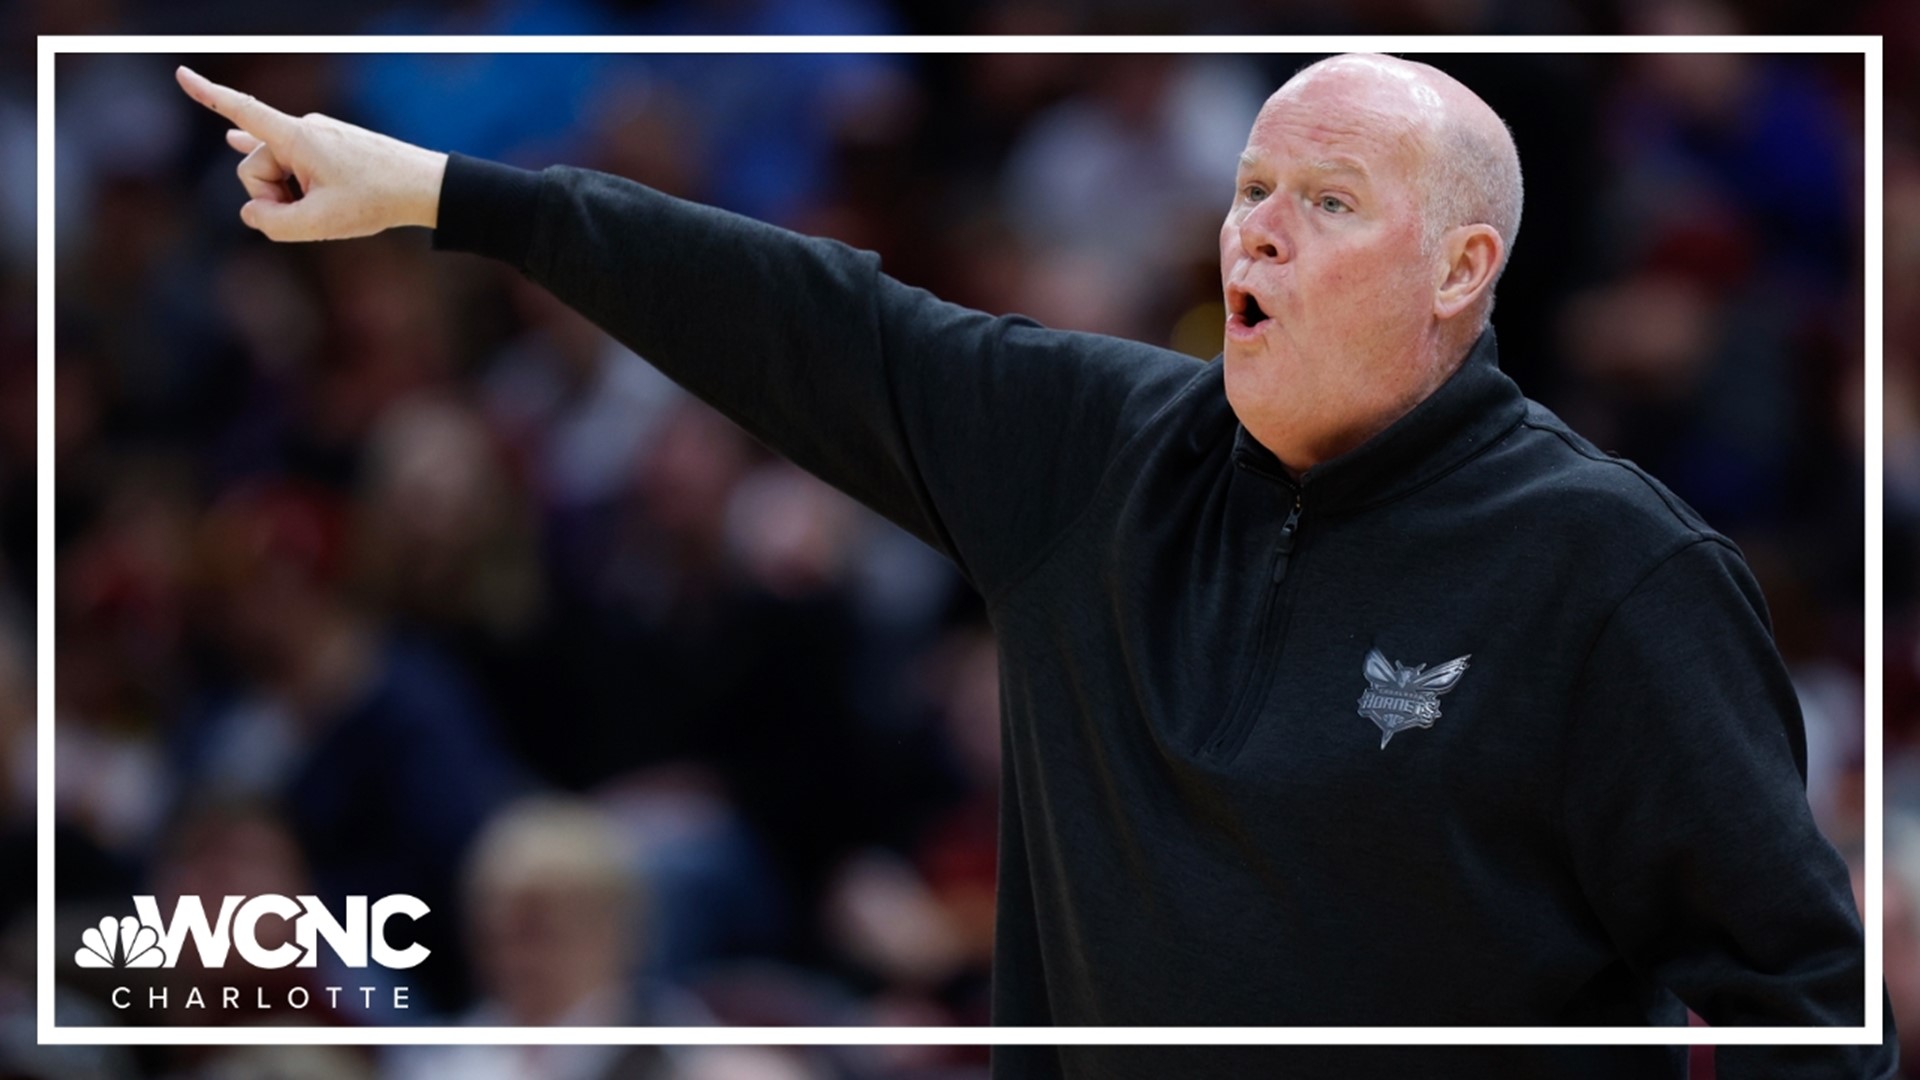 Charlotte Hornets head coach Steve Clifford will step down after the NBA season ends.